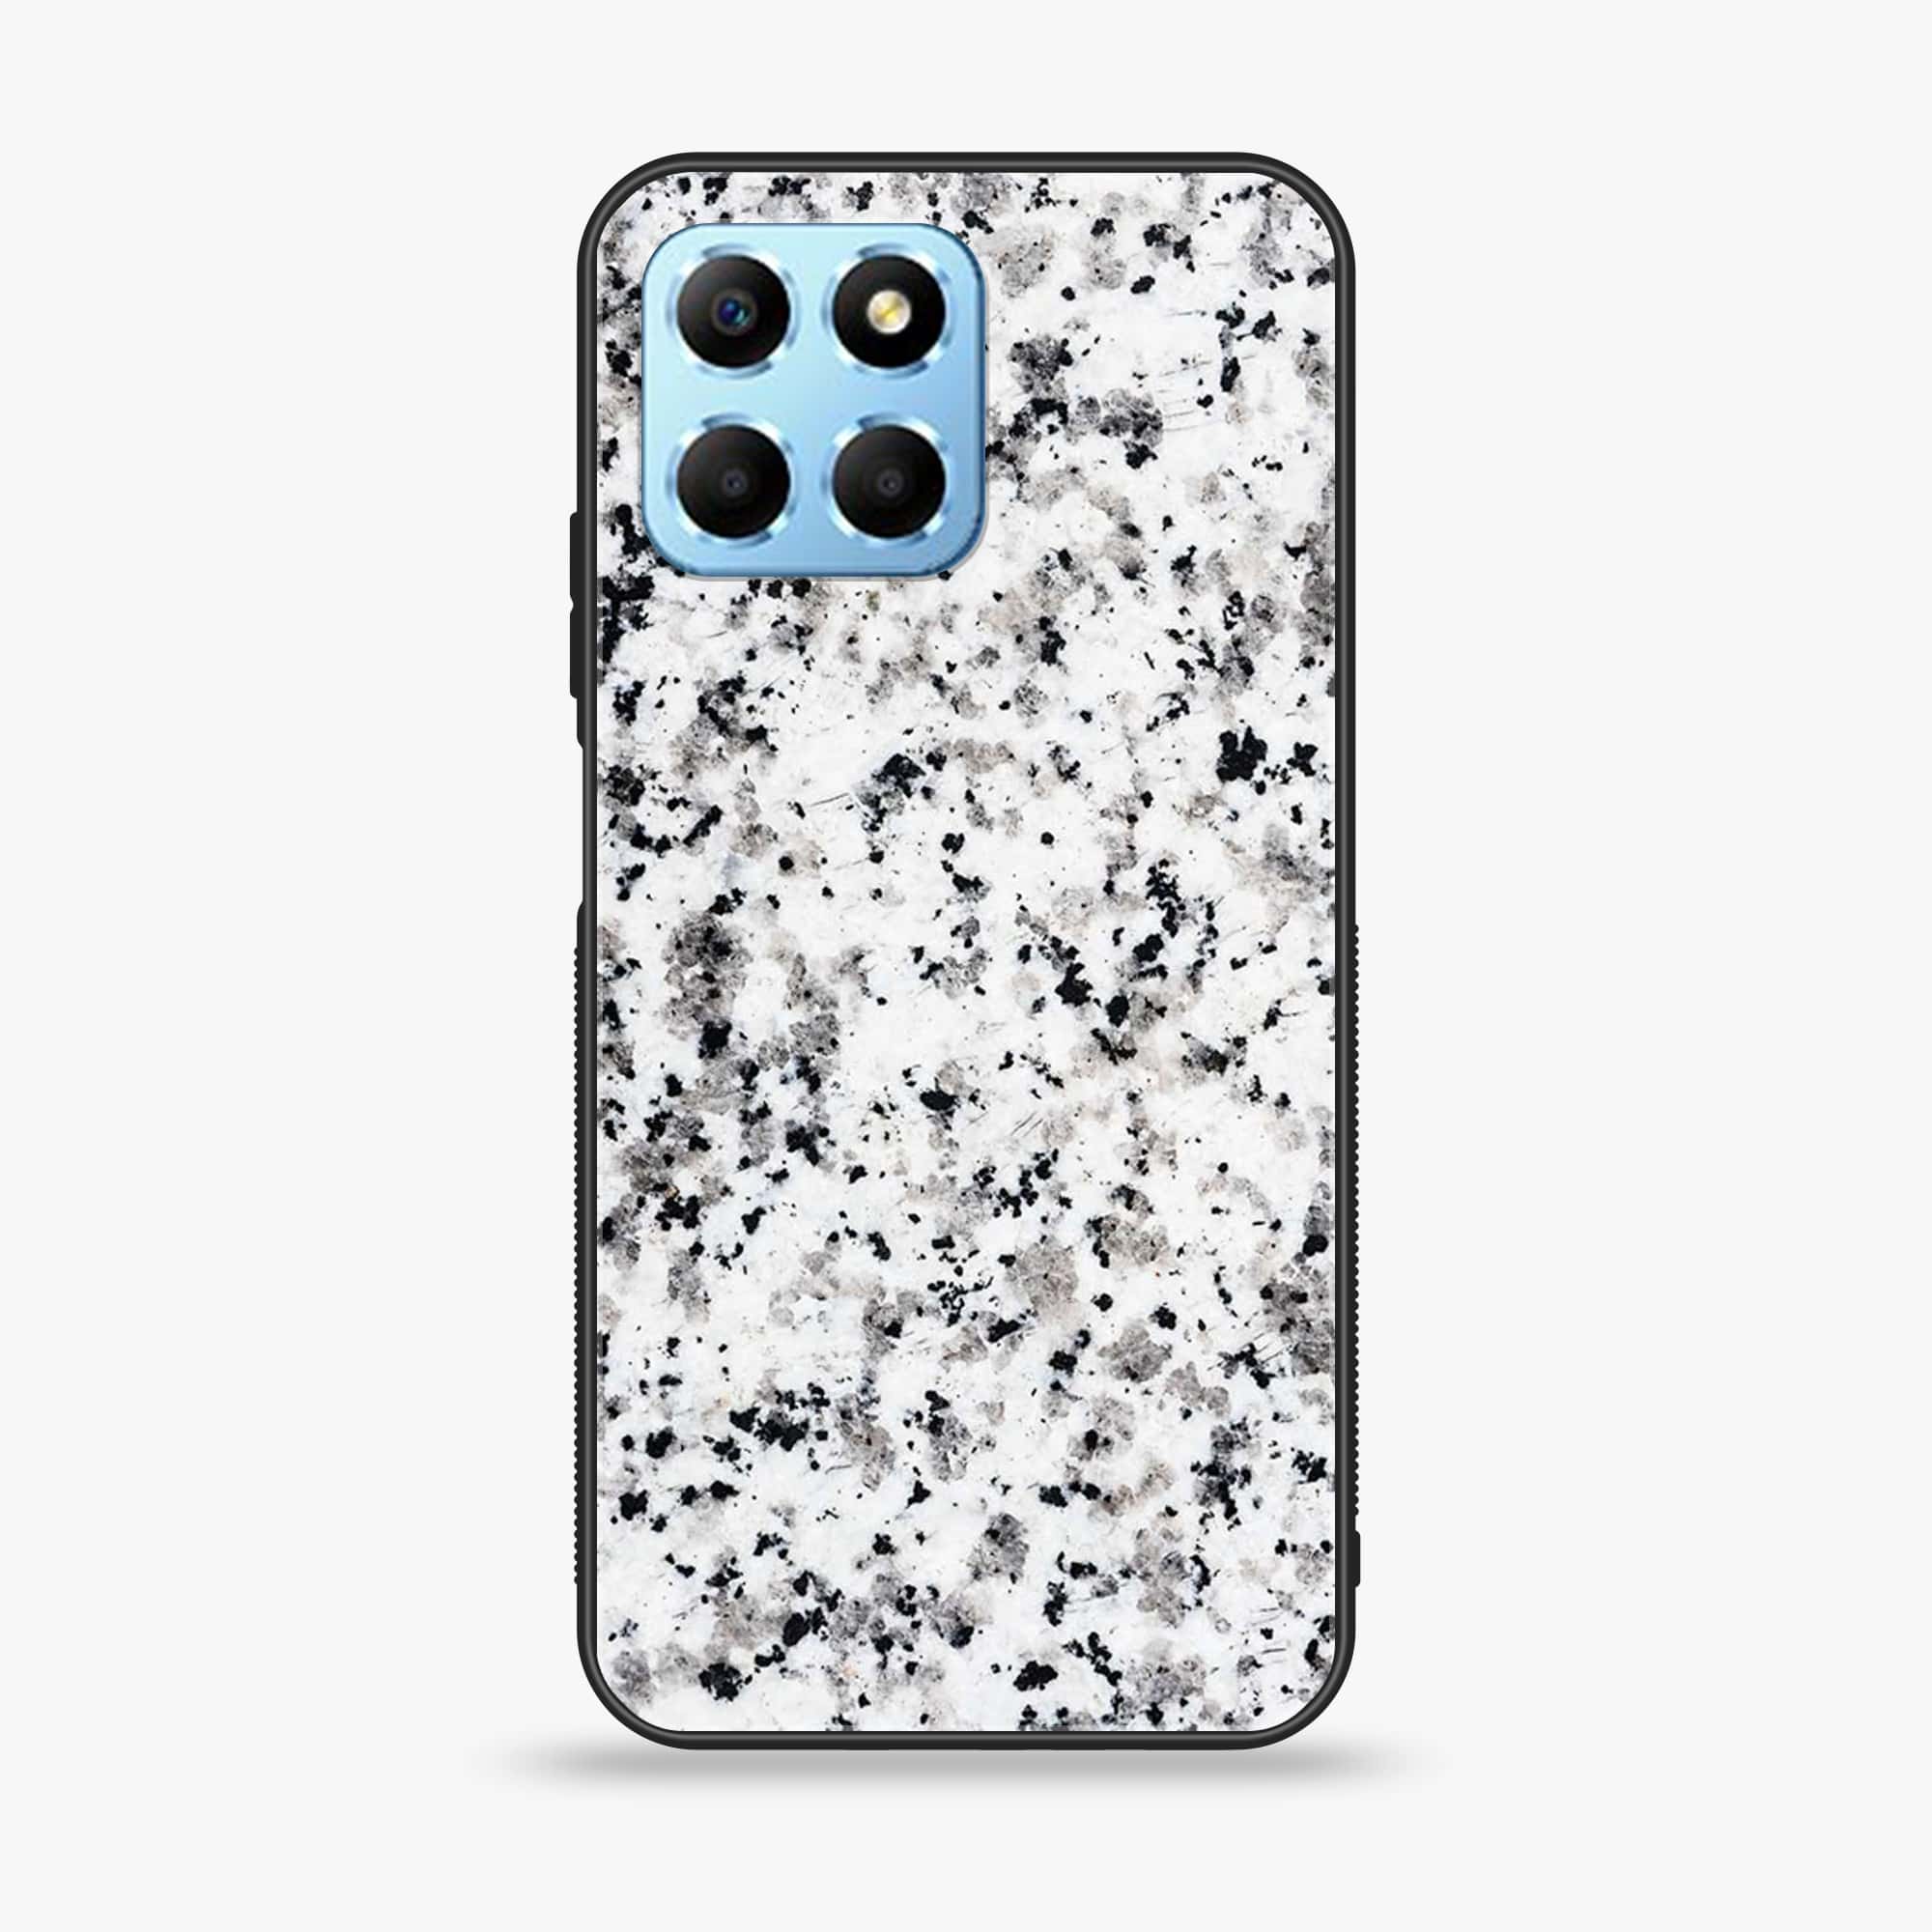 Honor X6 - White Marble Series - Premium Printed Glass soft Bumper shock Proof Case